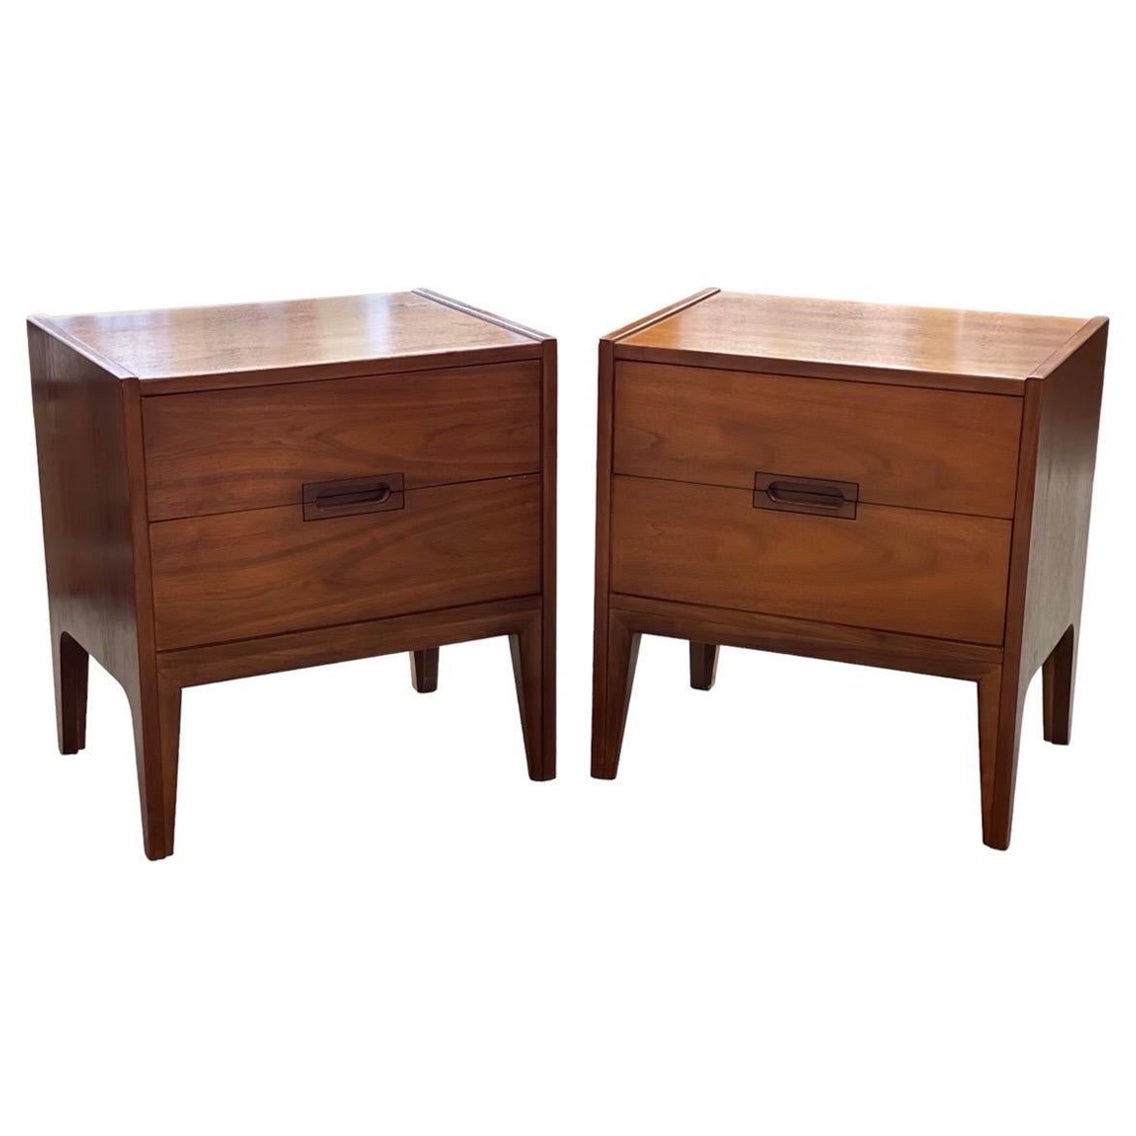 Vintage Mid-Century Modern Accent Tables Dovetail Drawers For Sale